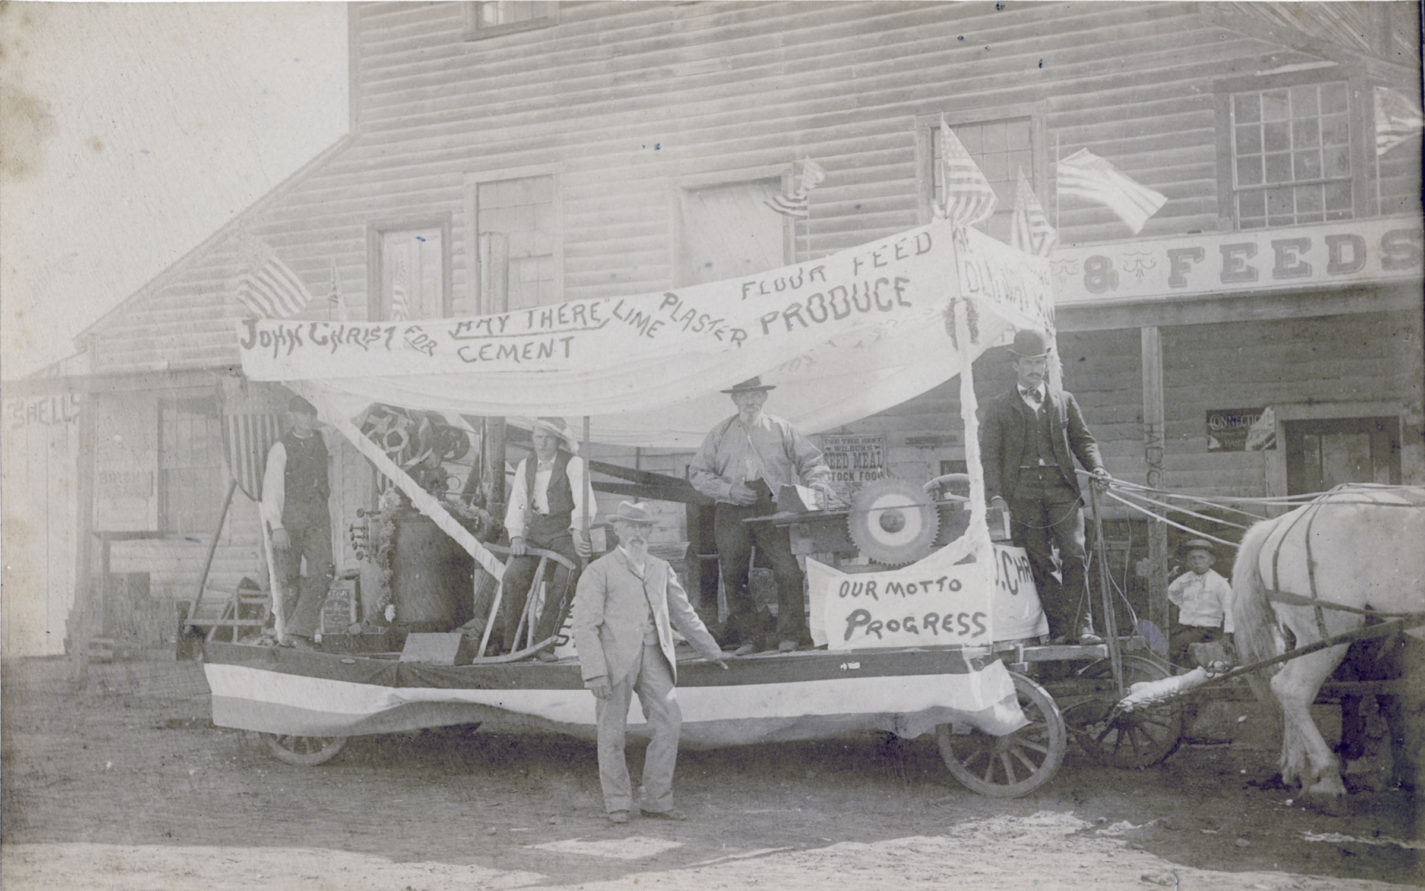 John Christ and his Fourth of July Float advertising his store